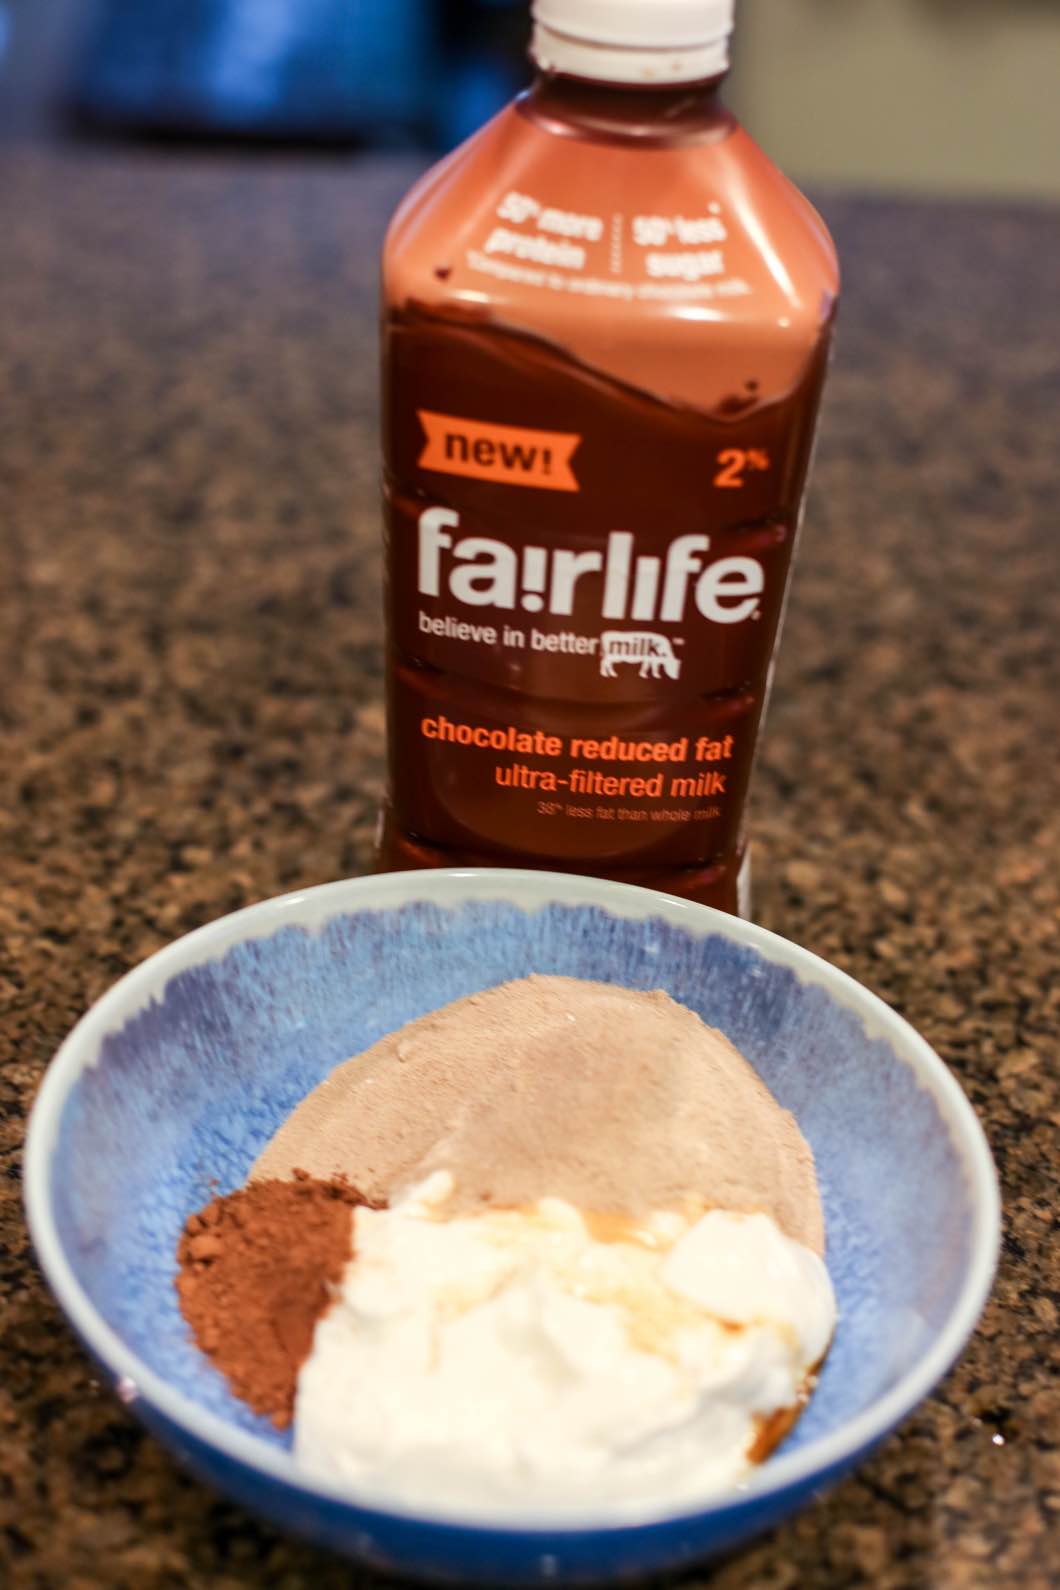 Post-Workout Treat: Protein Mousse with fairlife by fitness blogger Jessica of Happily Hughes